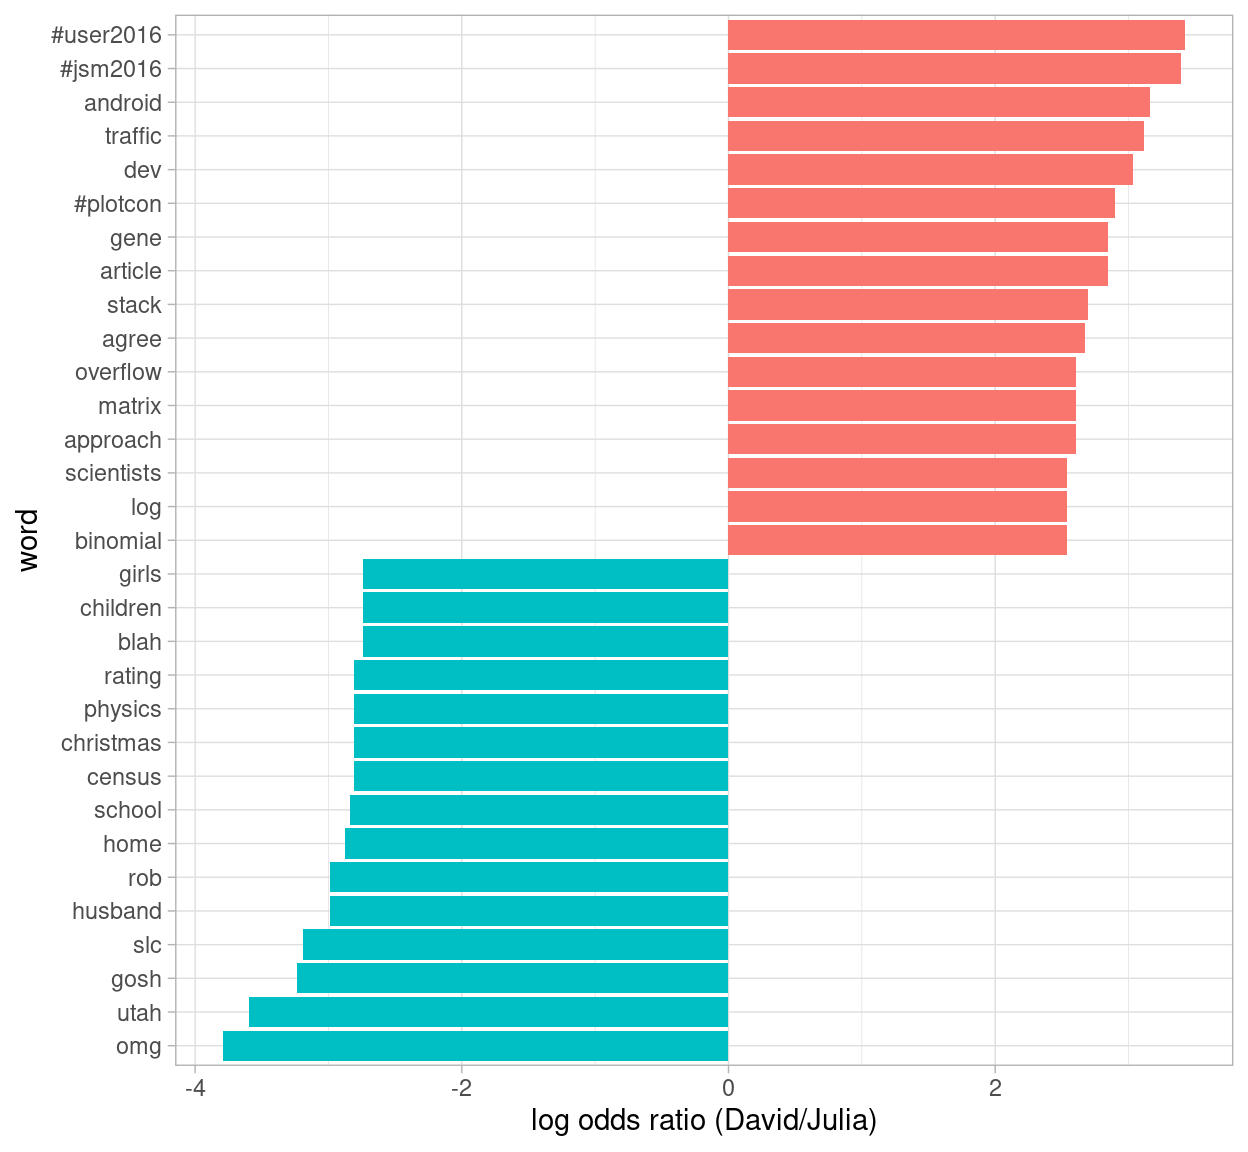 Comparing the odds ratios of words from our accounts